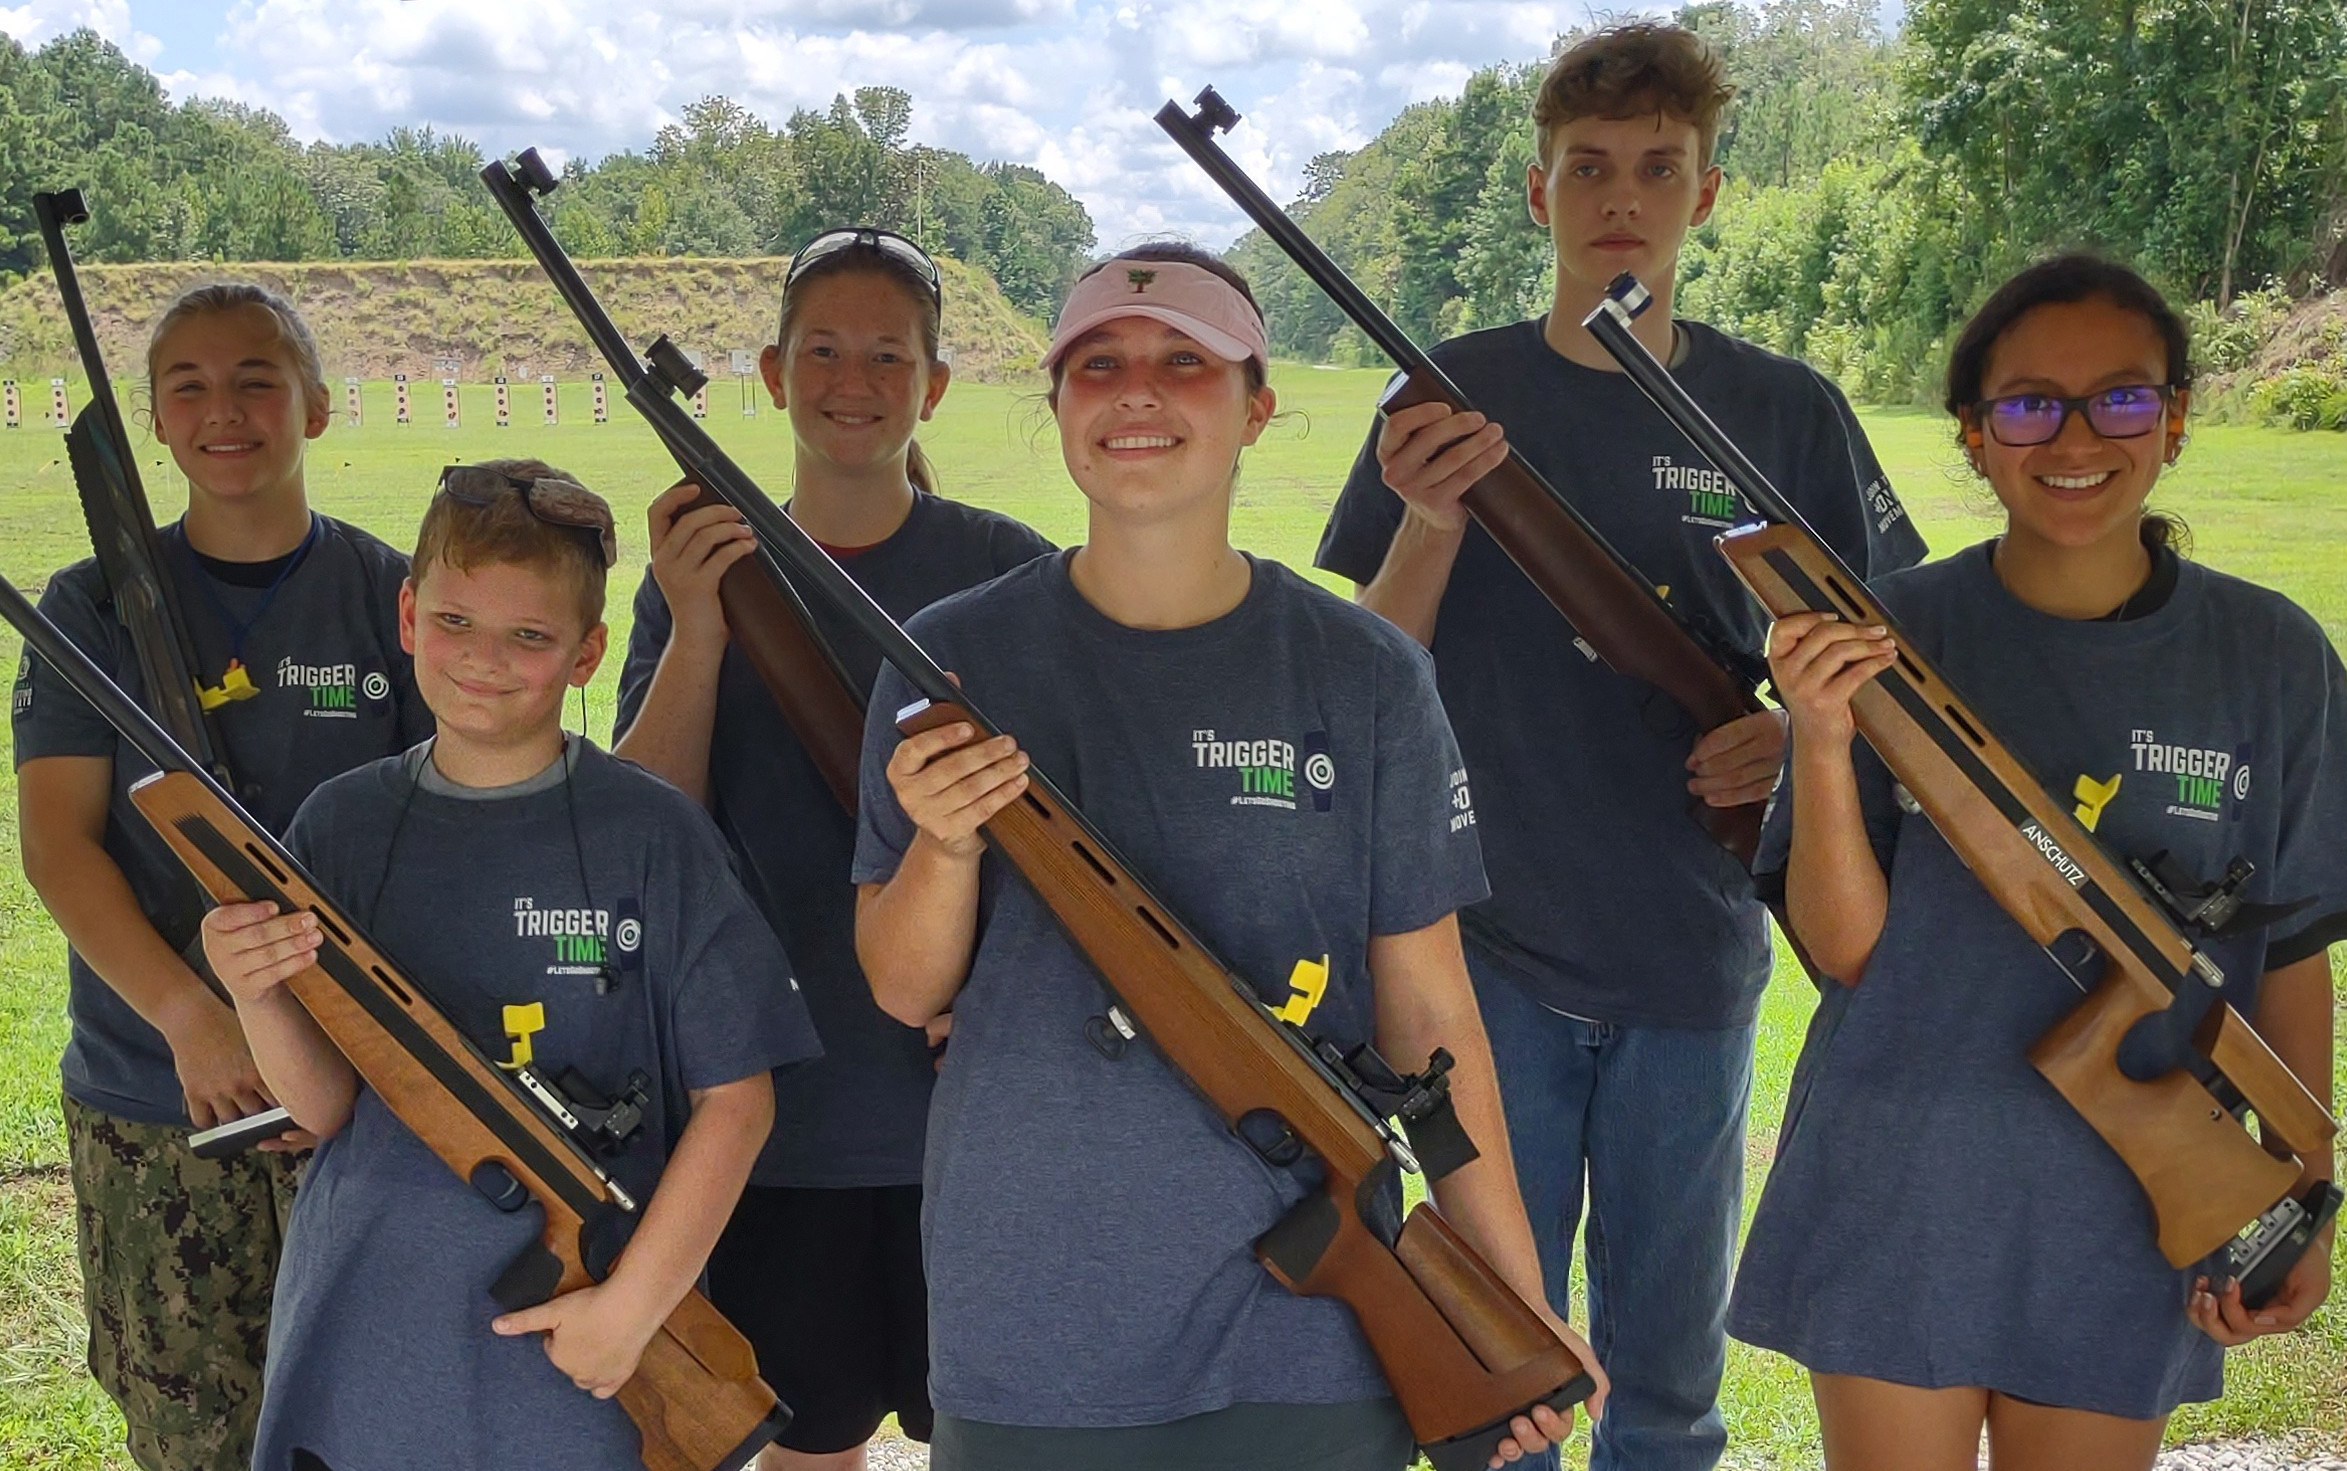 Six youth shot in our August smallbore match